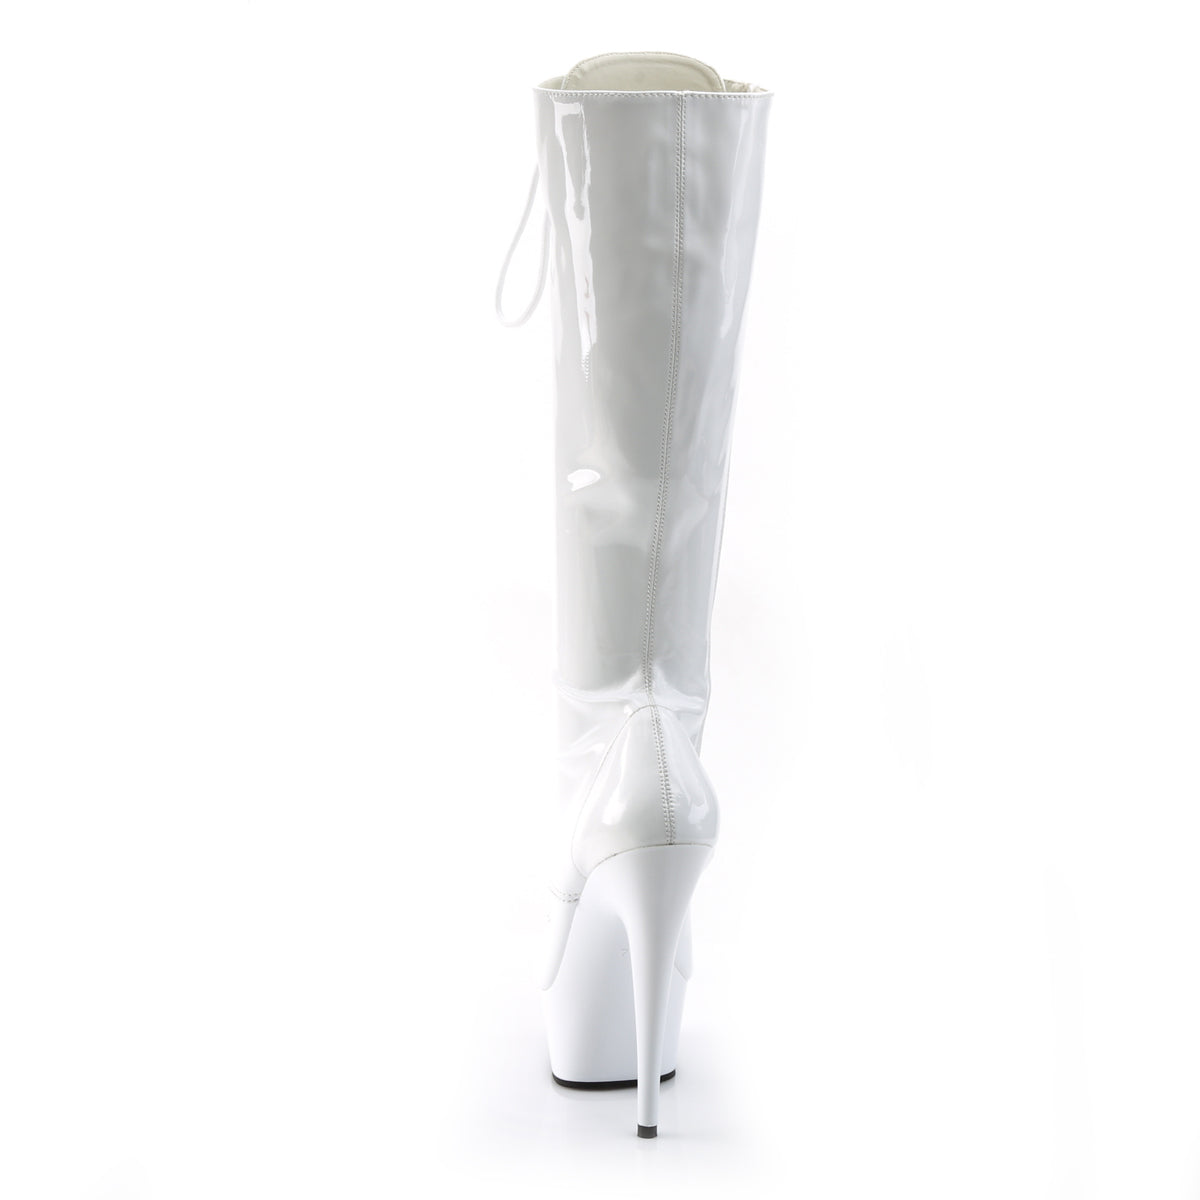 DELIGHT-2023 6 Inch Heel White Patent Pole Dancing Platforms-Pleaser- Sexy Shoes Fetish Footwear